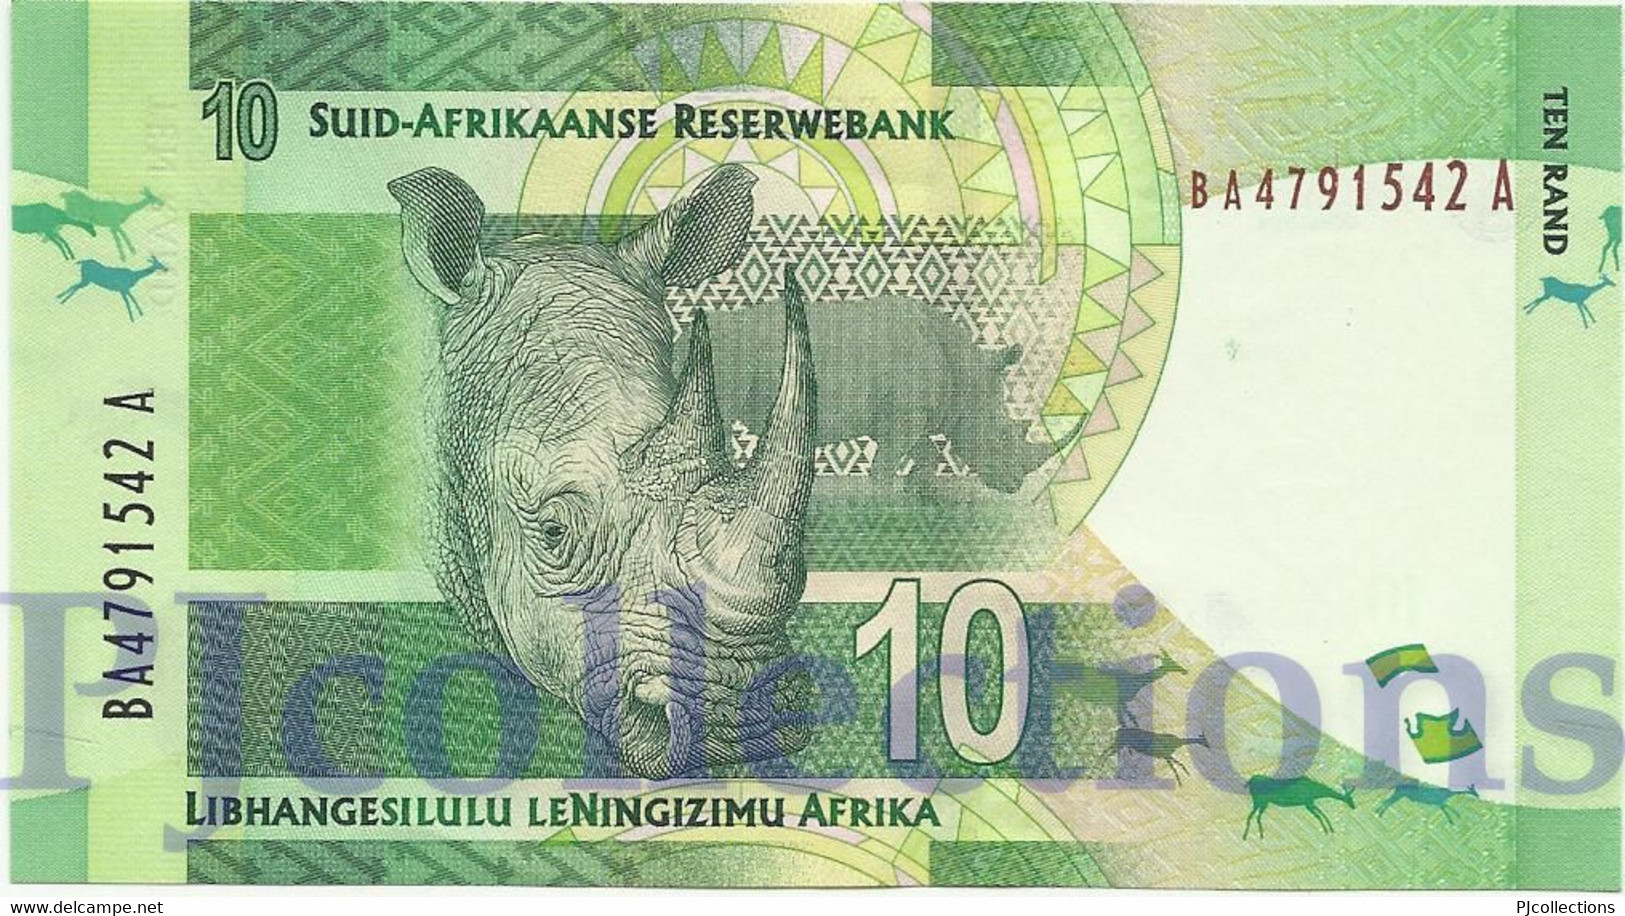 SOUTH AFRICA 10 RAND 2012 PICK 133 UNC - South Africa